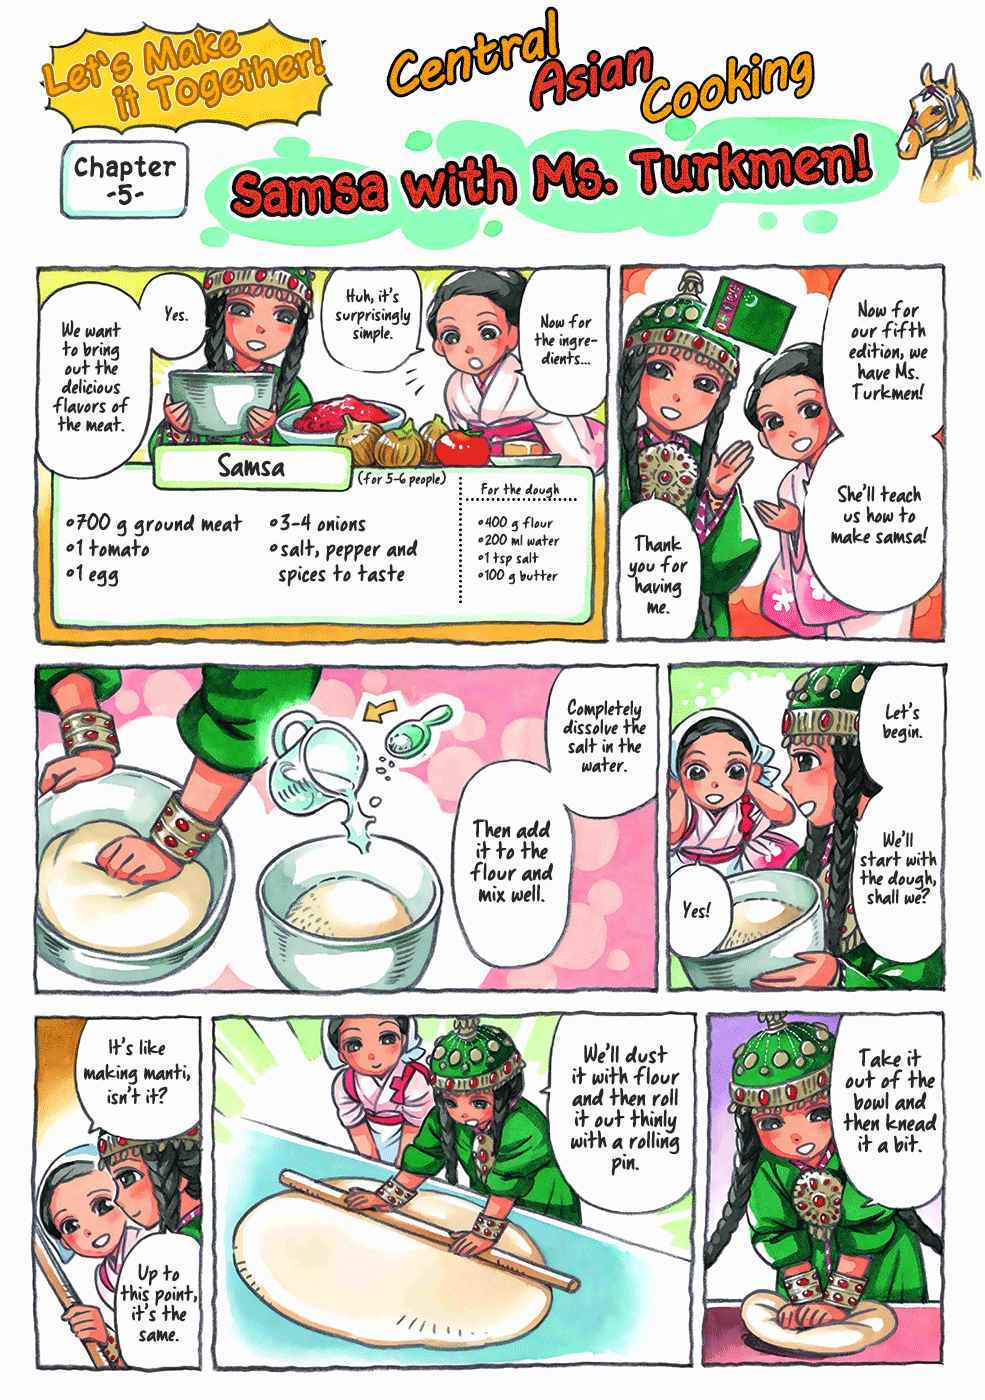 Central Asian Cooking Ch. 5